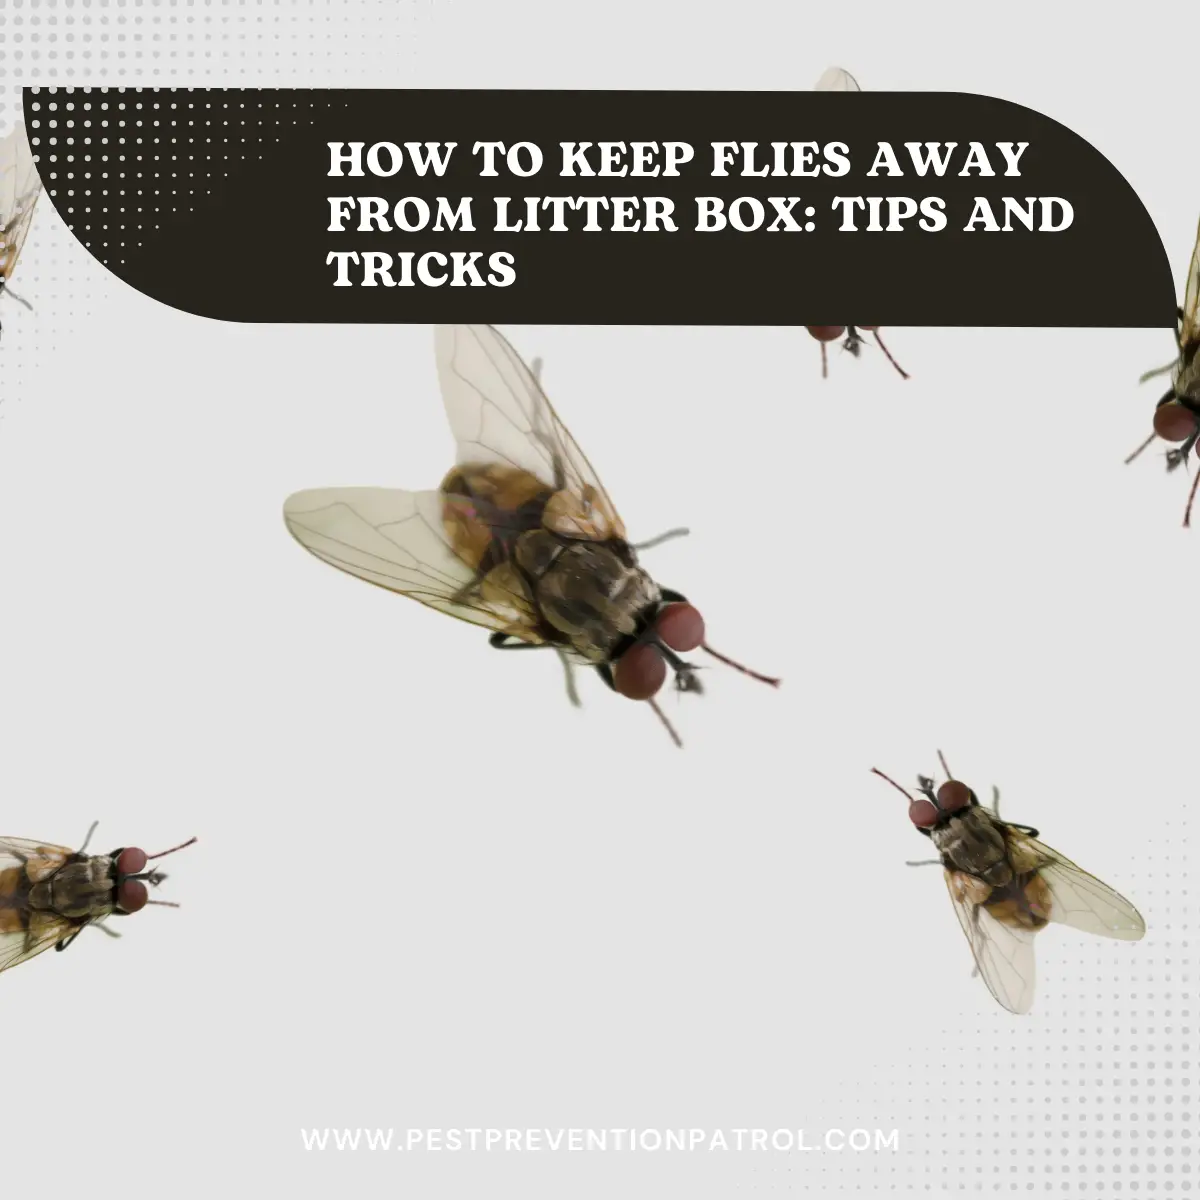 How to Keep Flies Away from Litter Box_ Tips and Tricks